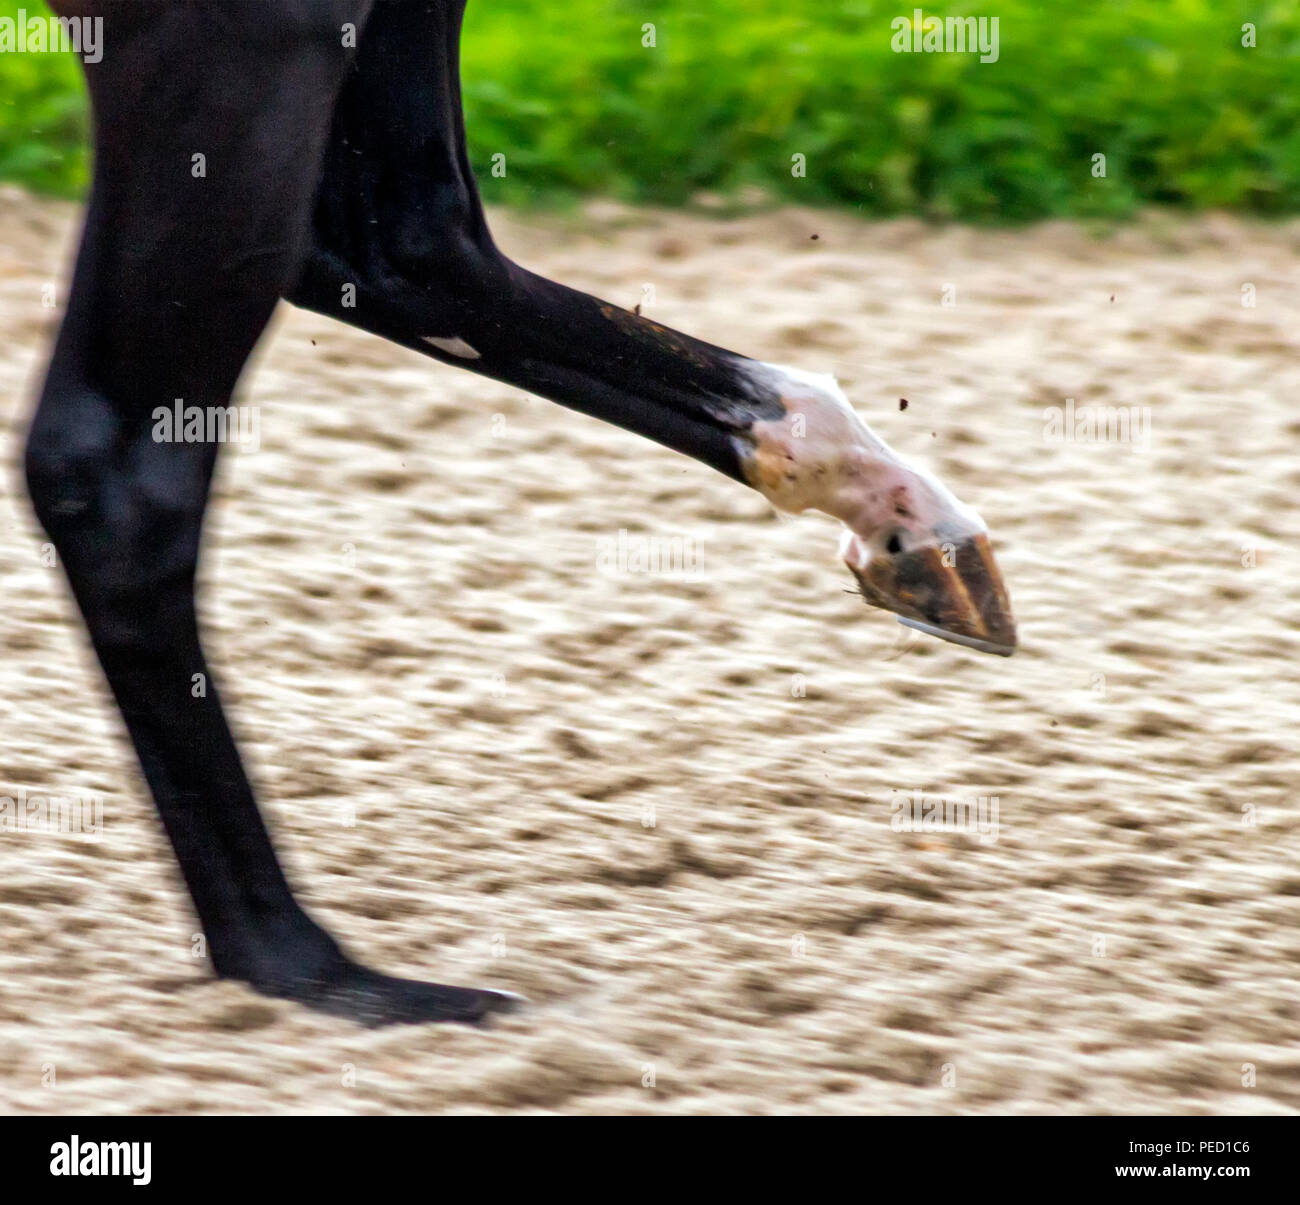 A horse in speed running and kicking up leg. Stock Photo